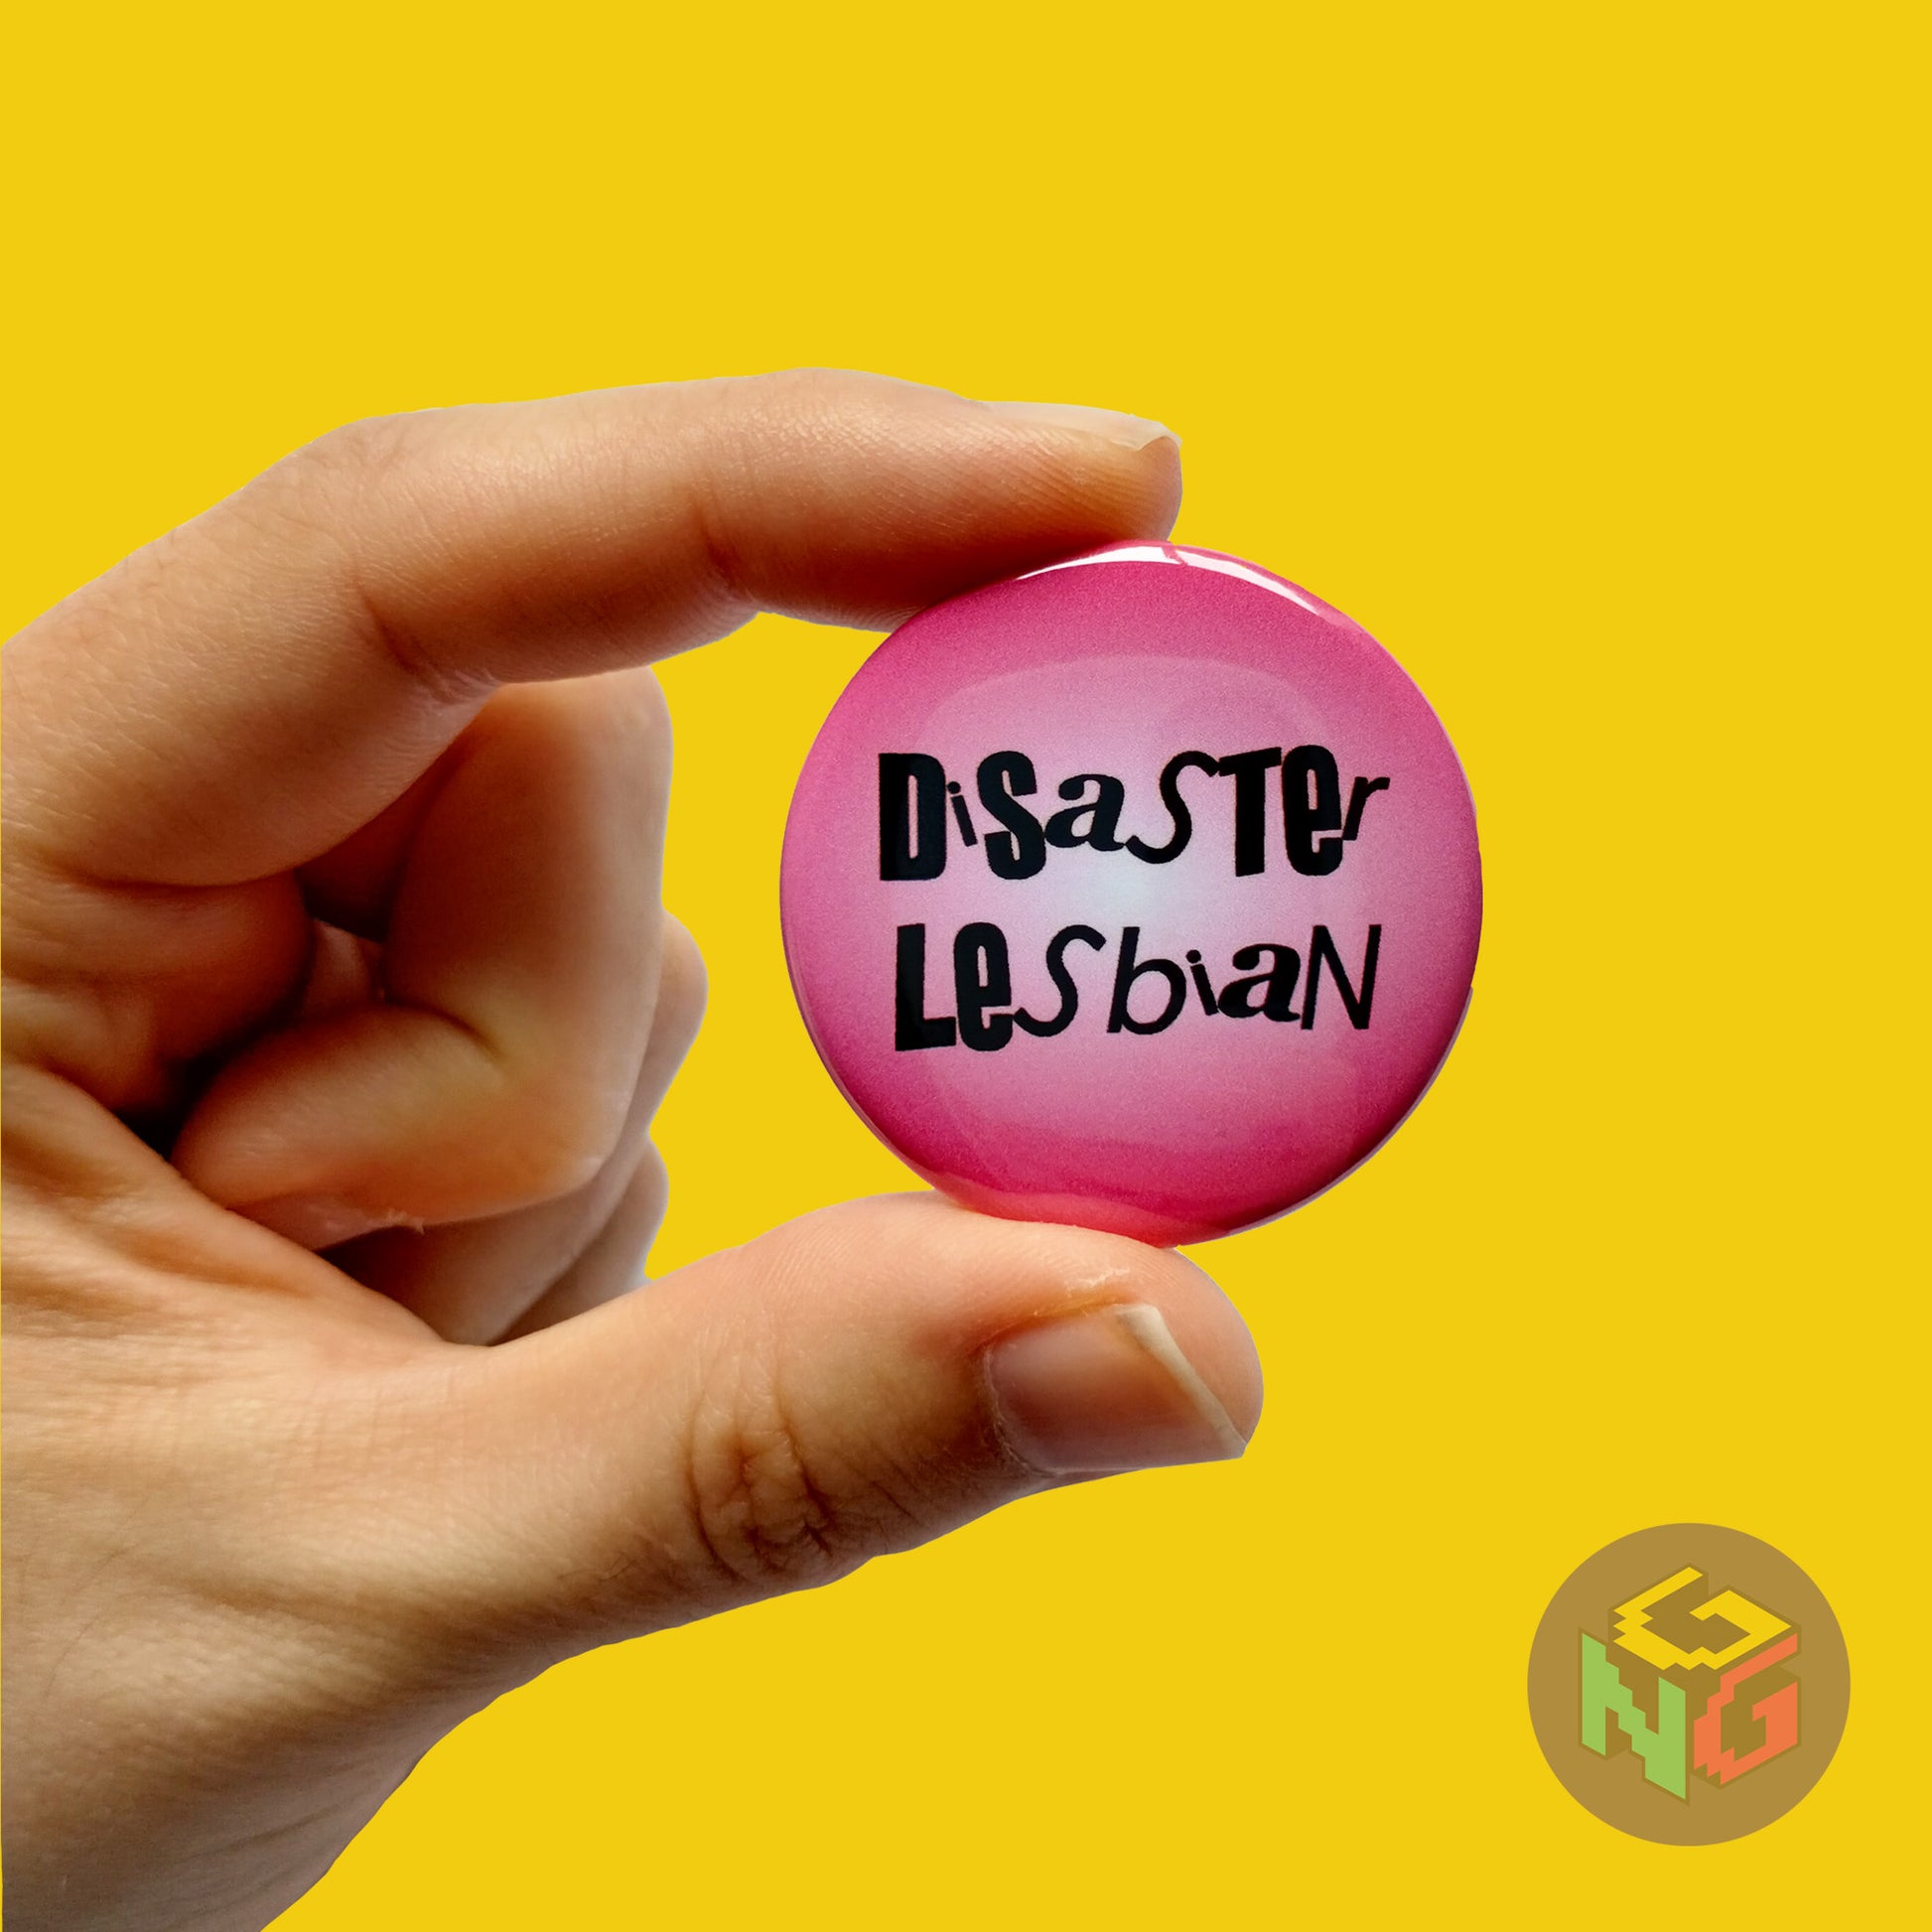 pink disaster lesbian pin held in a hand in front of yellow background